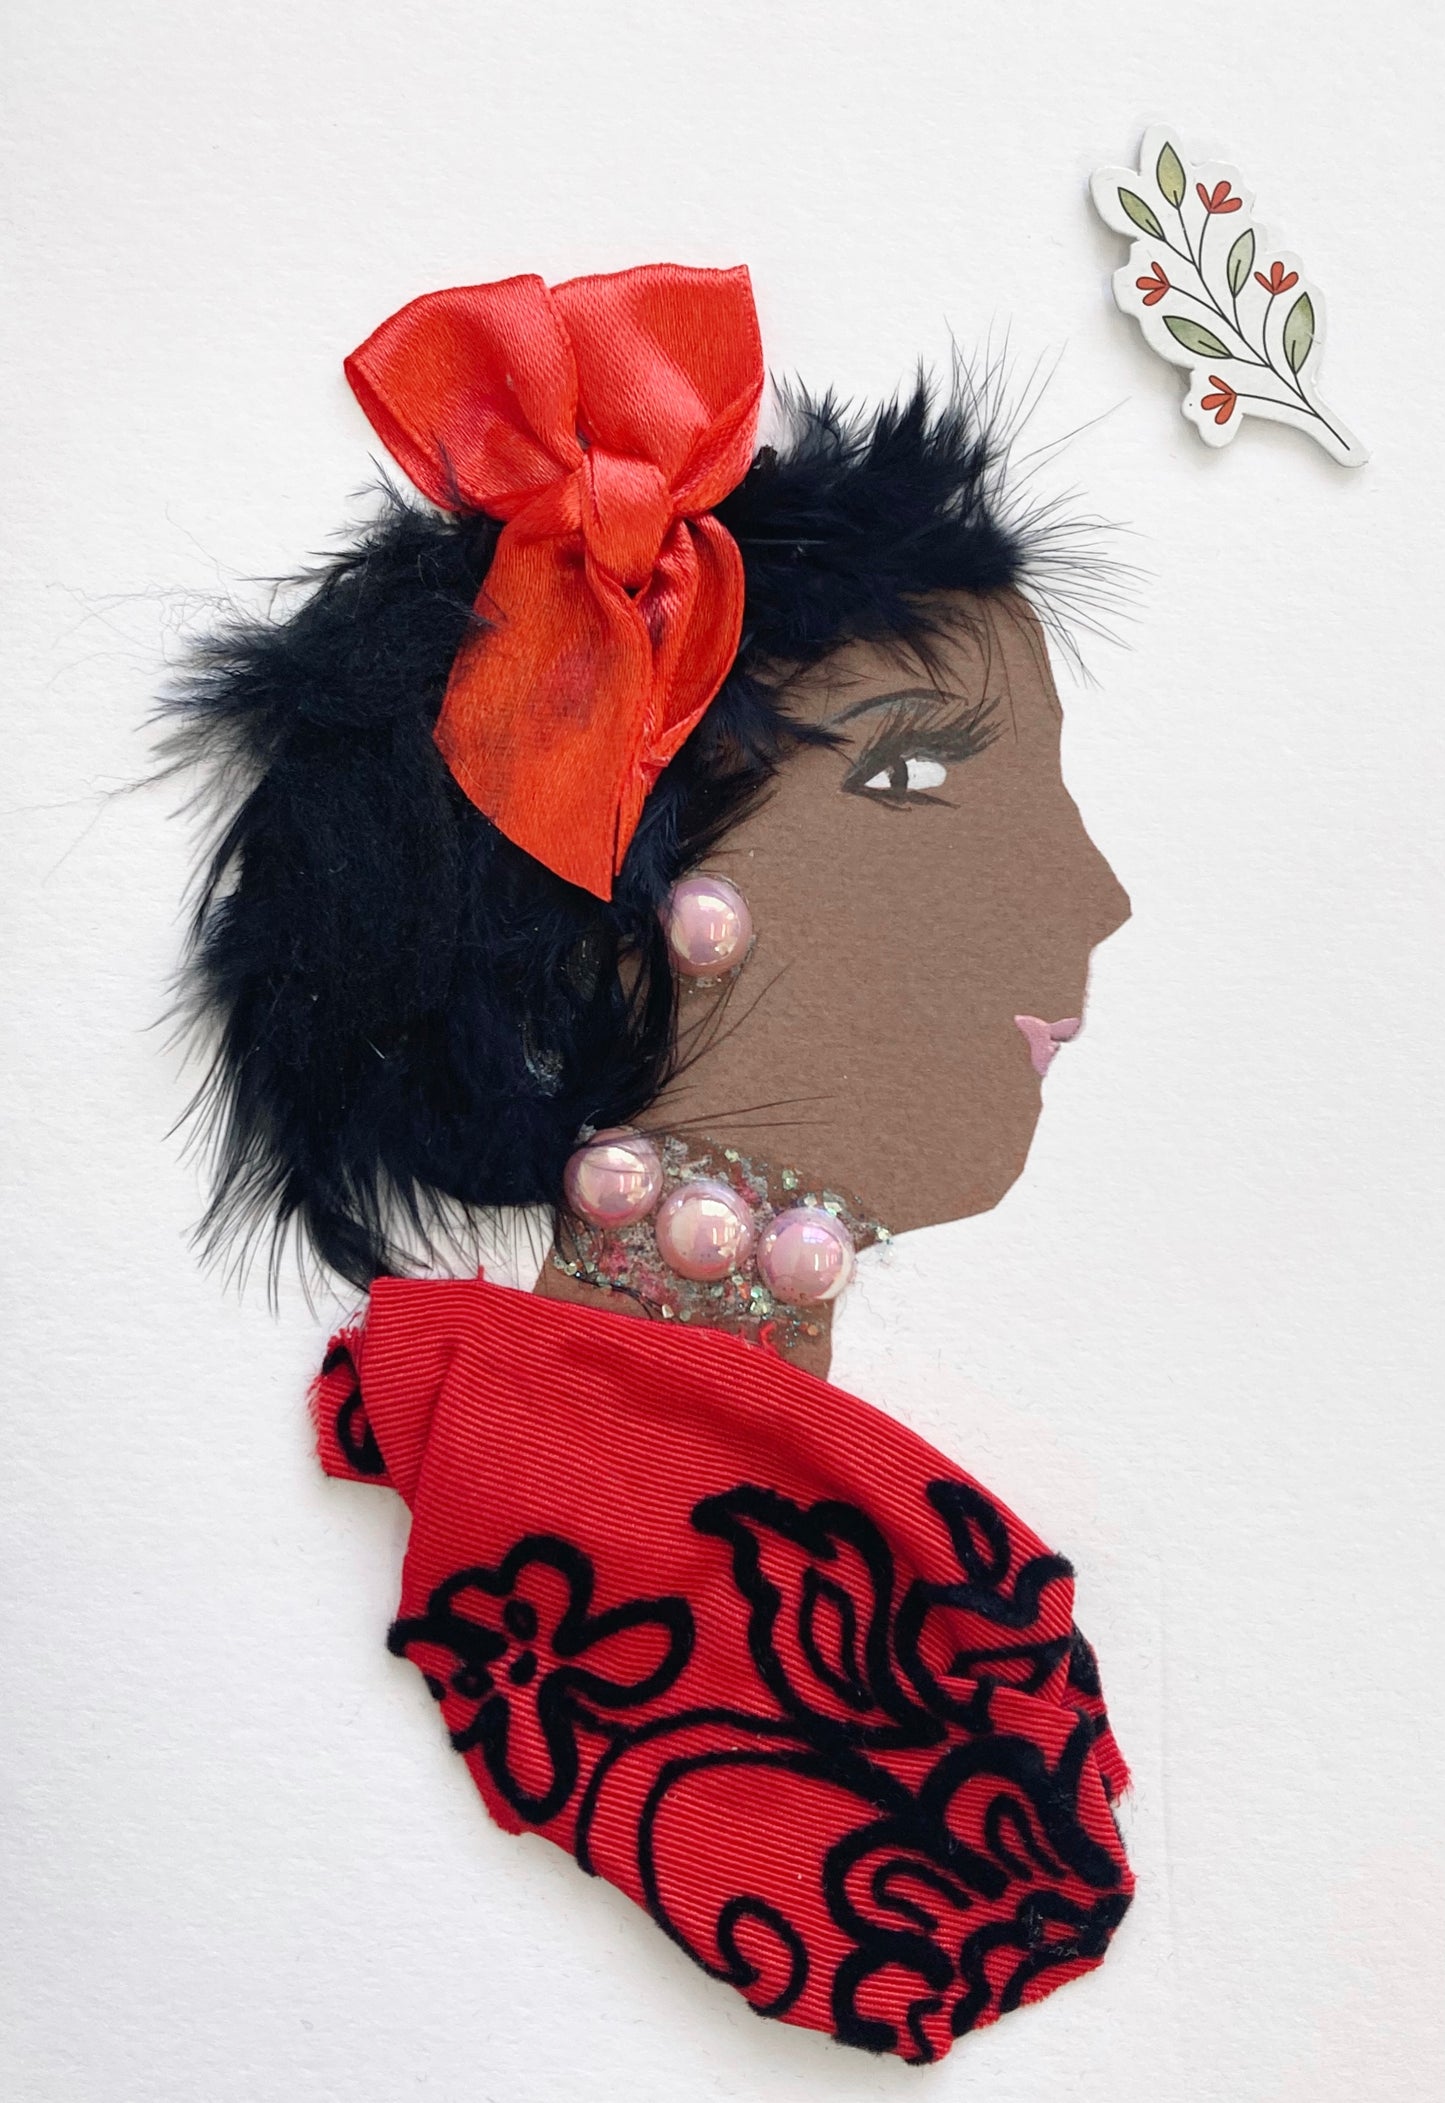 This card is of a woman given the name Narrow Harrow. She wears a red blouse made of a fabric which has black flower embroidery on it. Her jewellery is pink pearls. She wears a red ribbon bow in her short black hair. In the top right corner, there is a sticker of a branch with flowers coming out of it. 